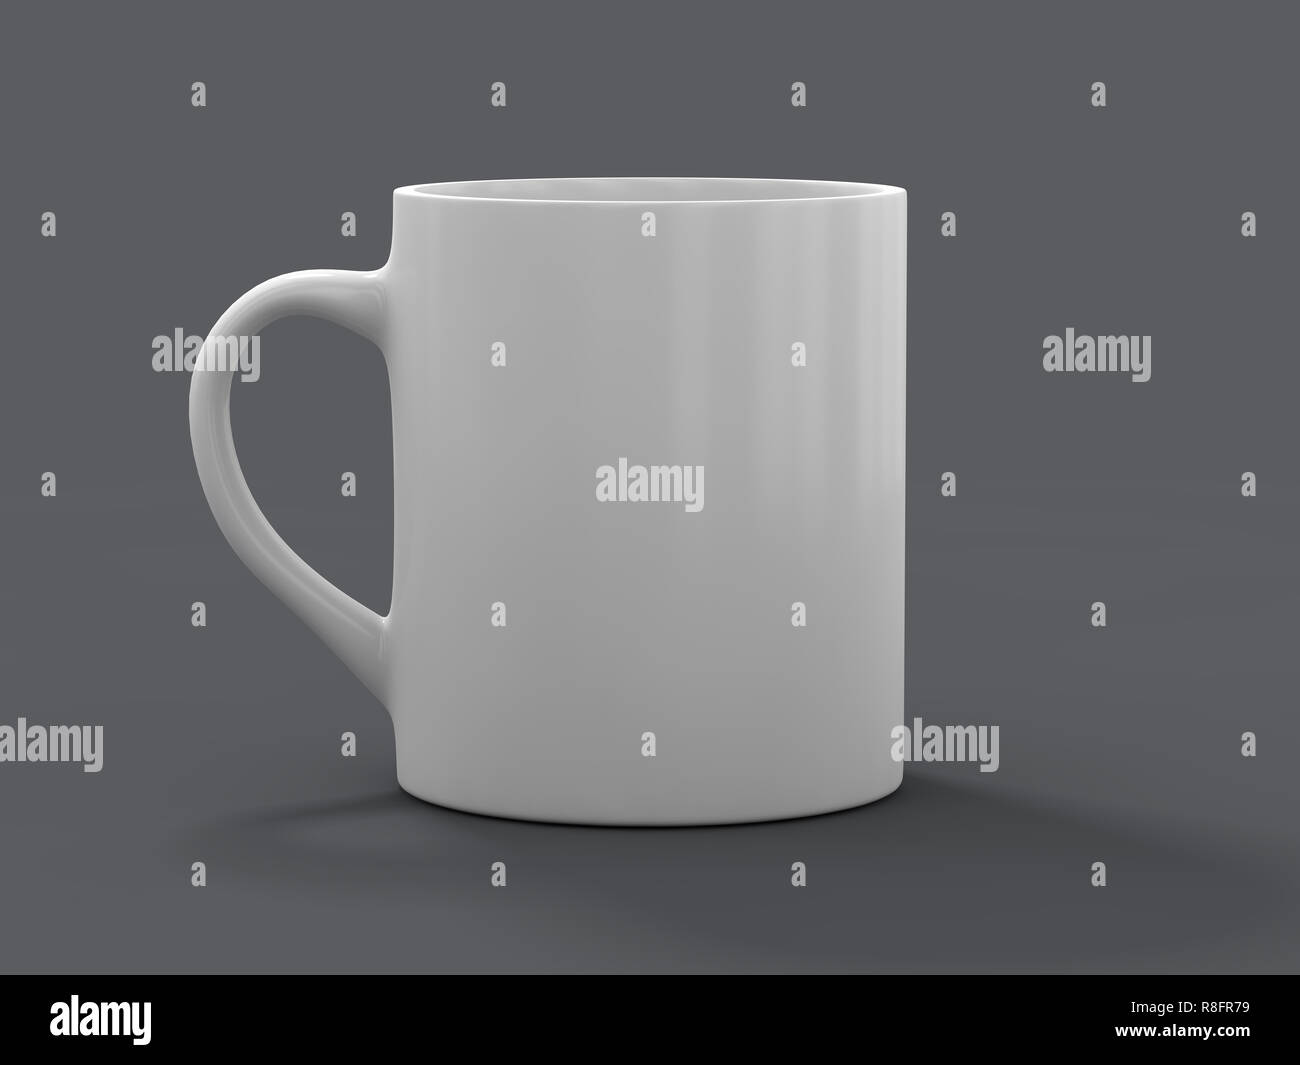 Mug Mockup standing on the surface. 3D rendering Stock Photo